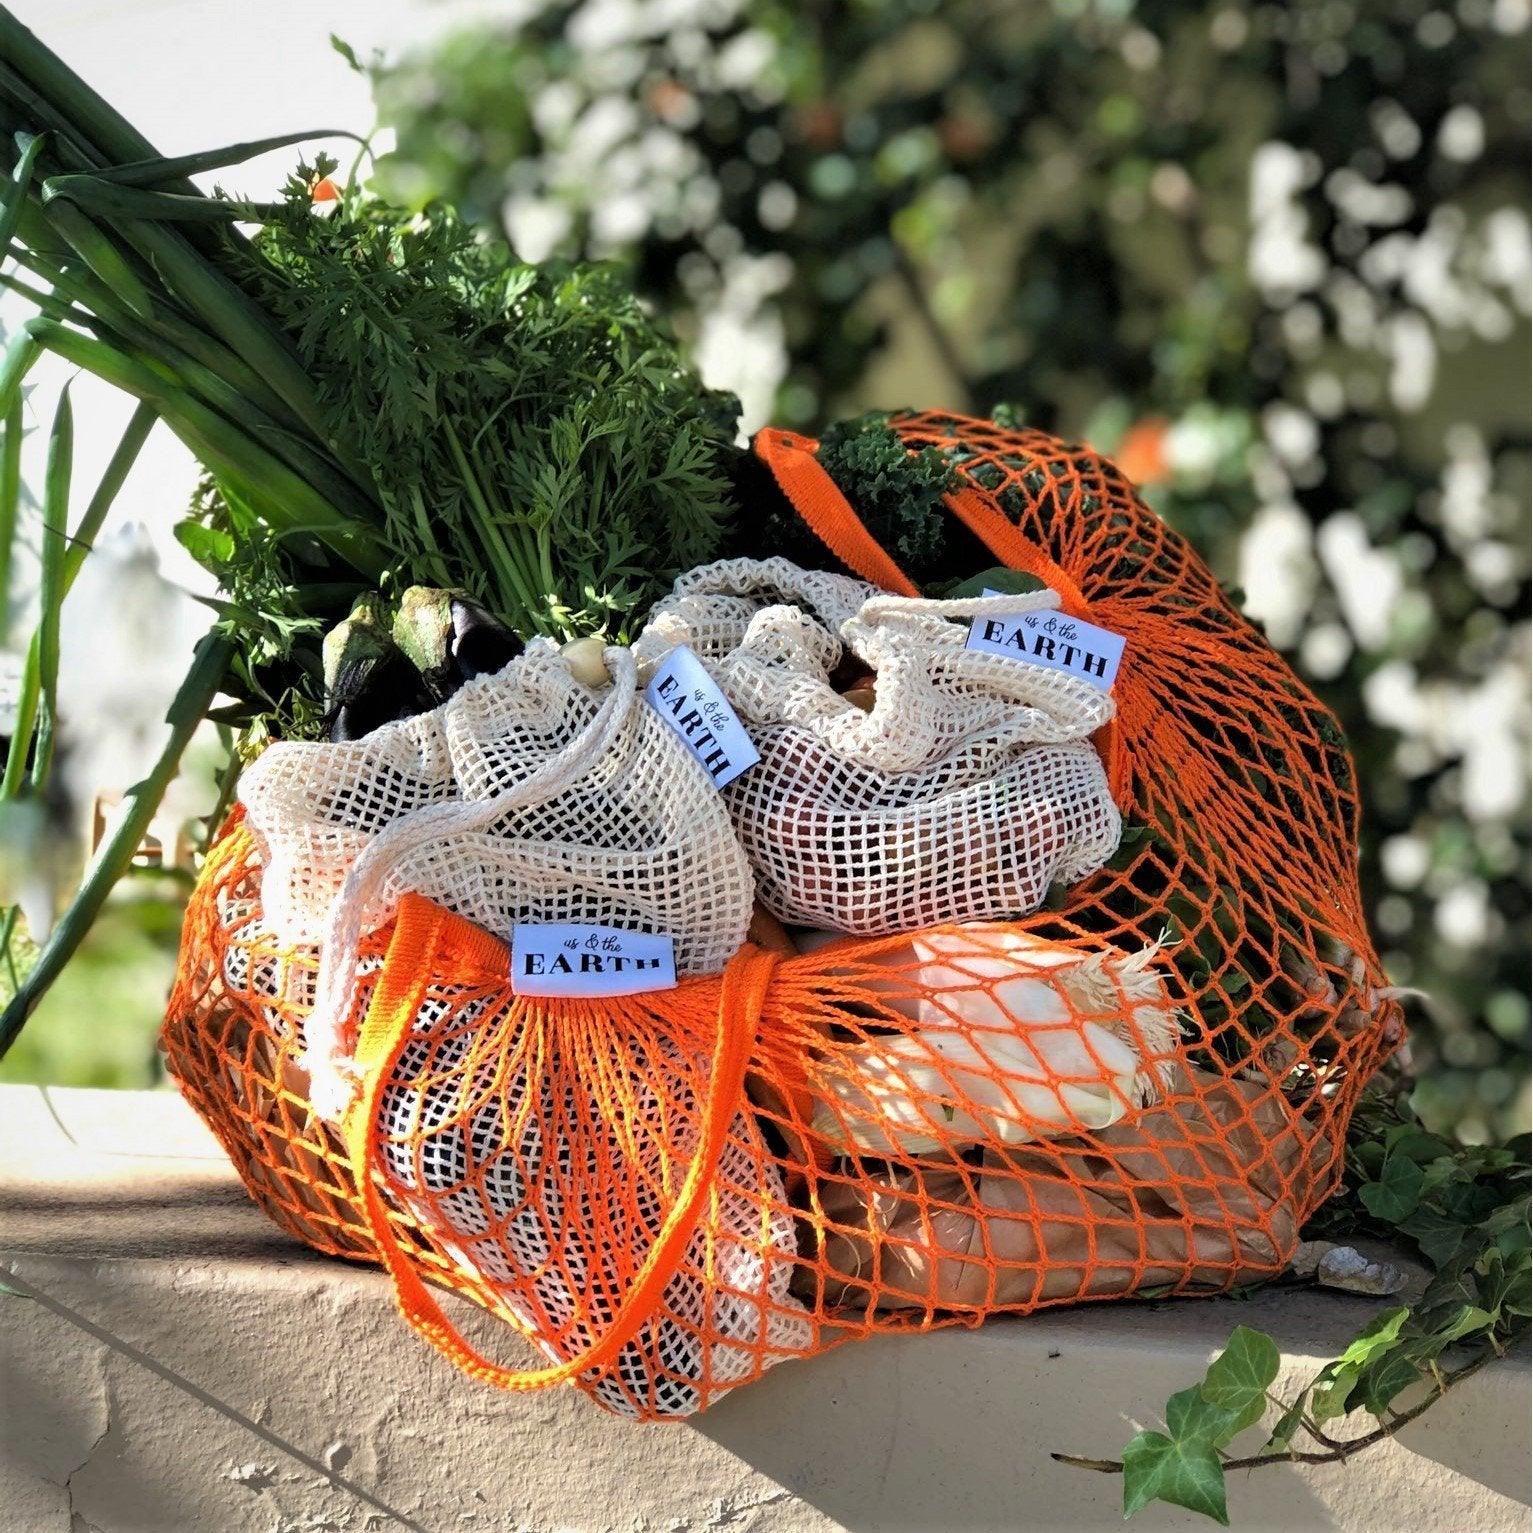 Market Day Shopping Bundle | 6 Produce Bags | Mesh Shopping ToteSustainable Kitchen - Us and the Earth